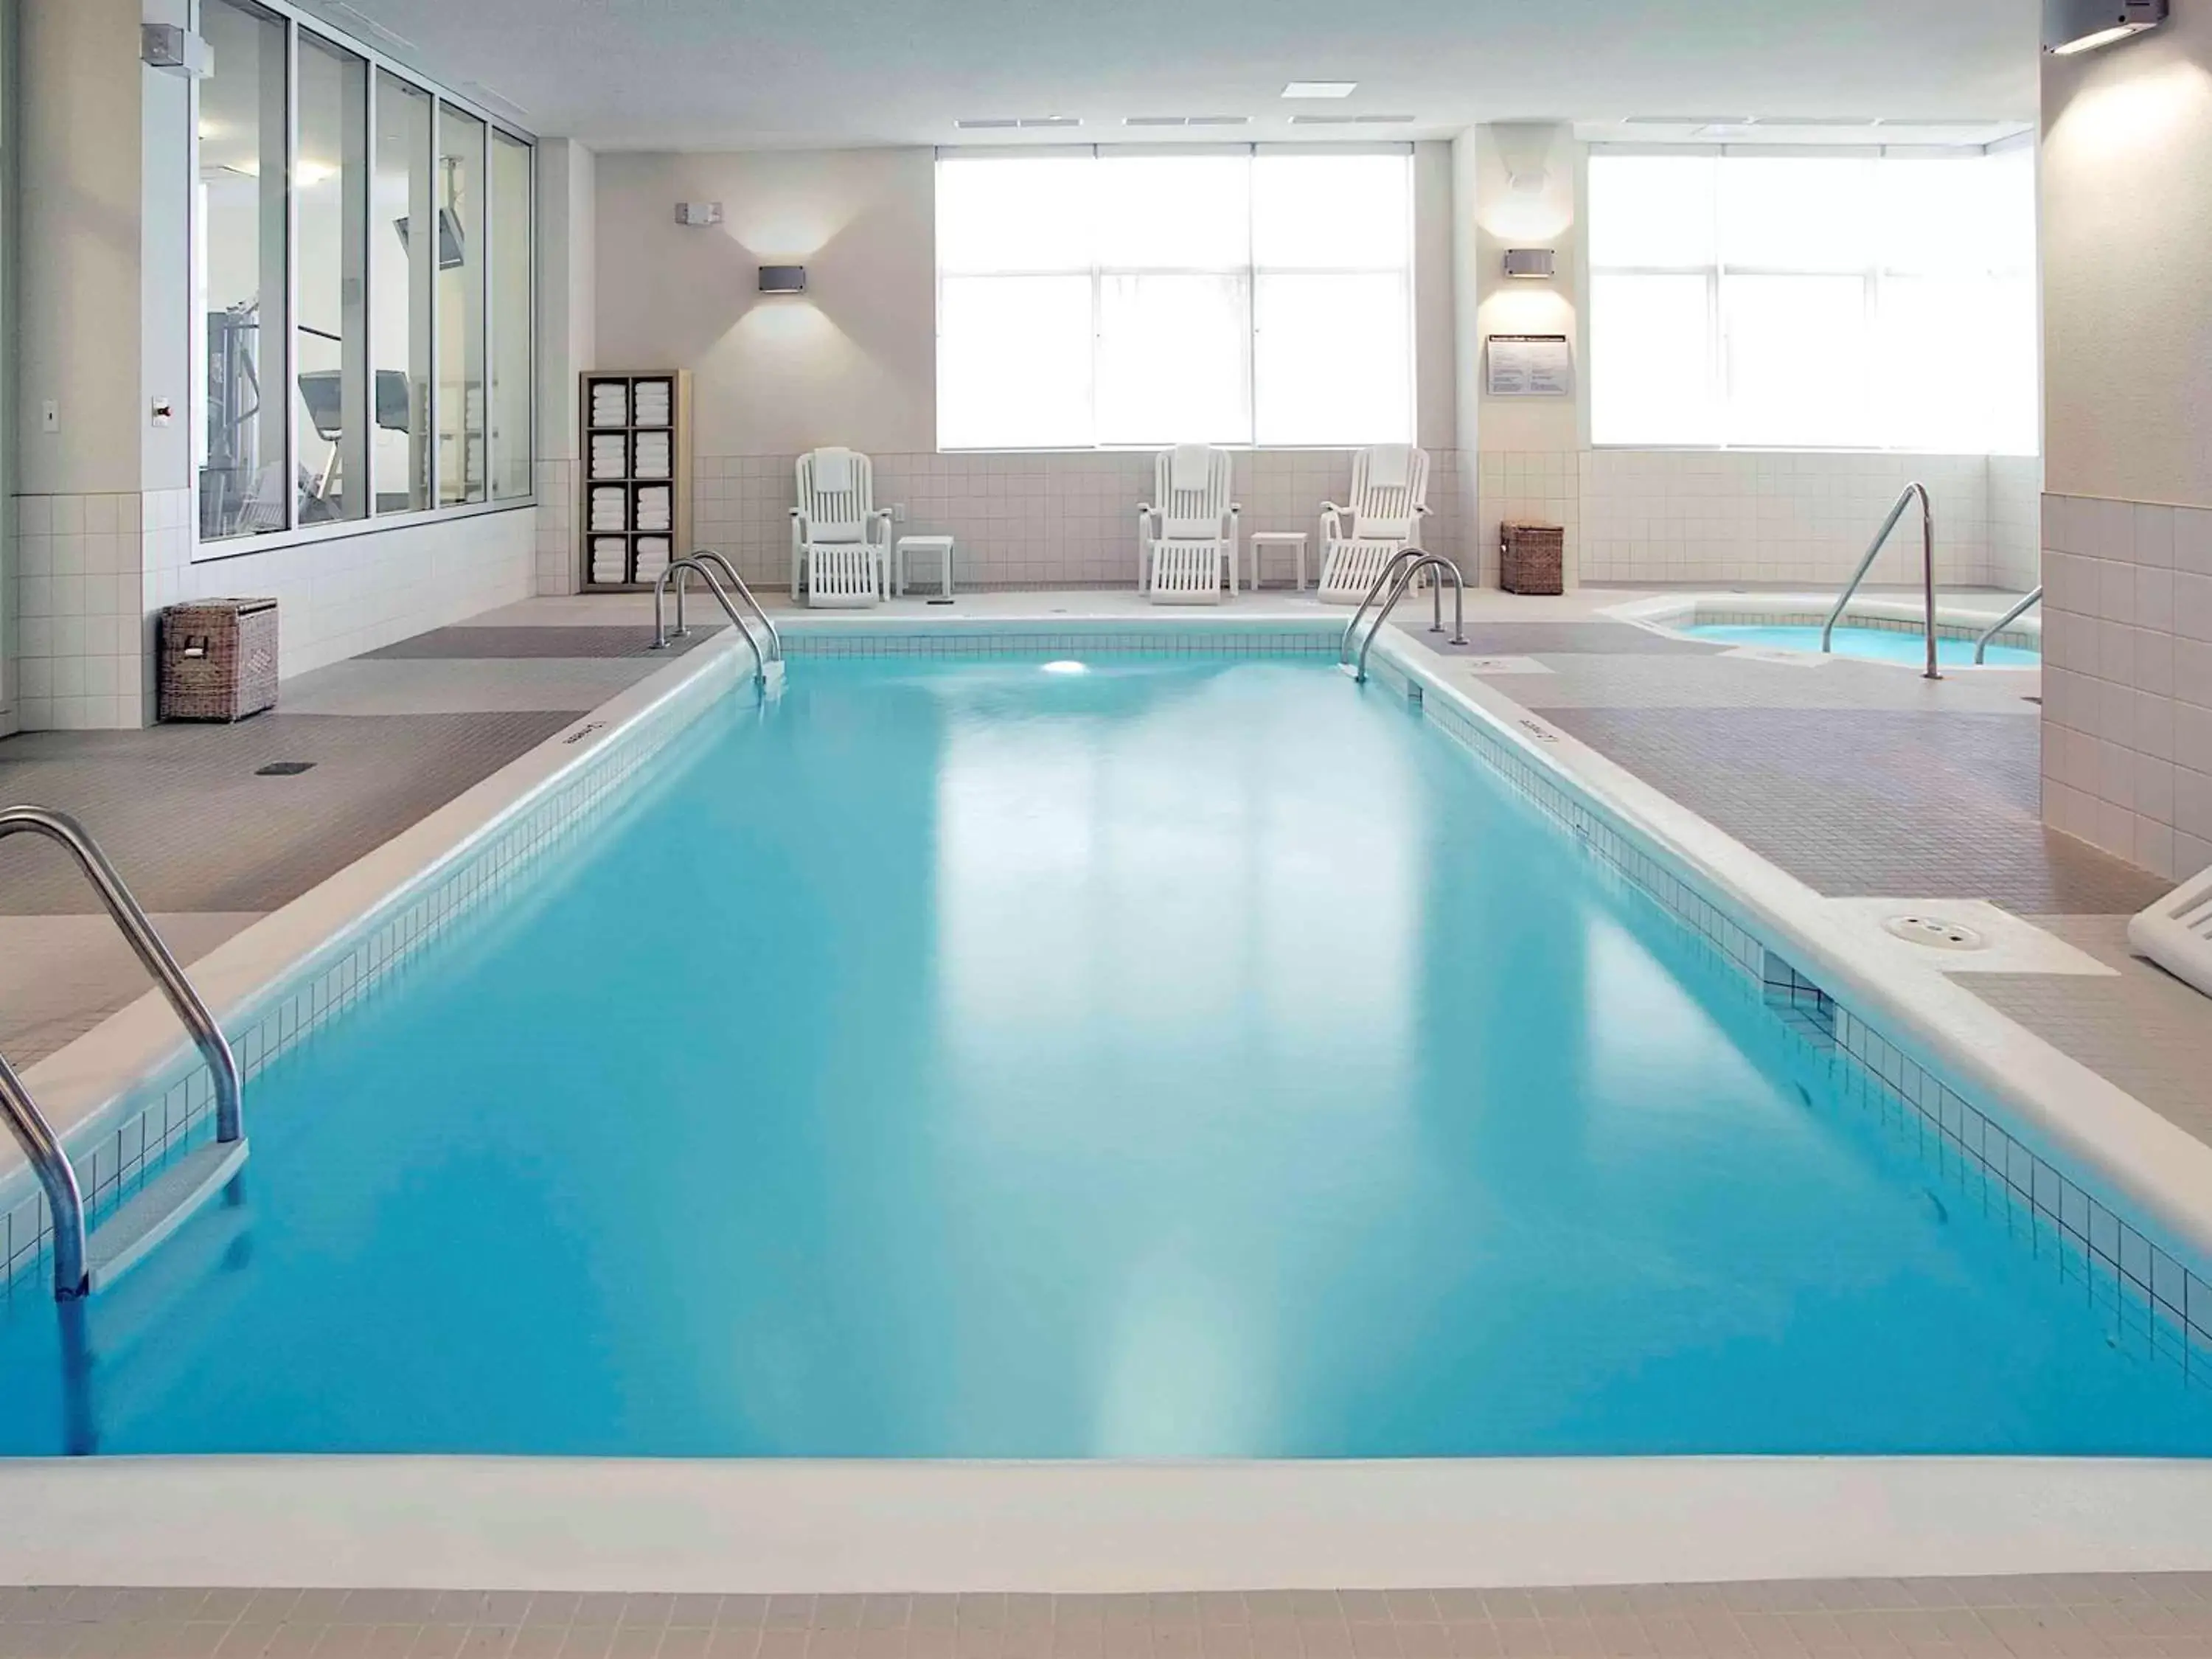 On site, Swimming Pool in Novotel Montréal Aéroport